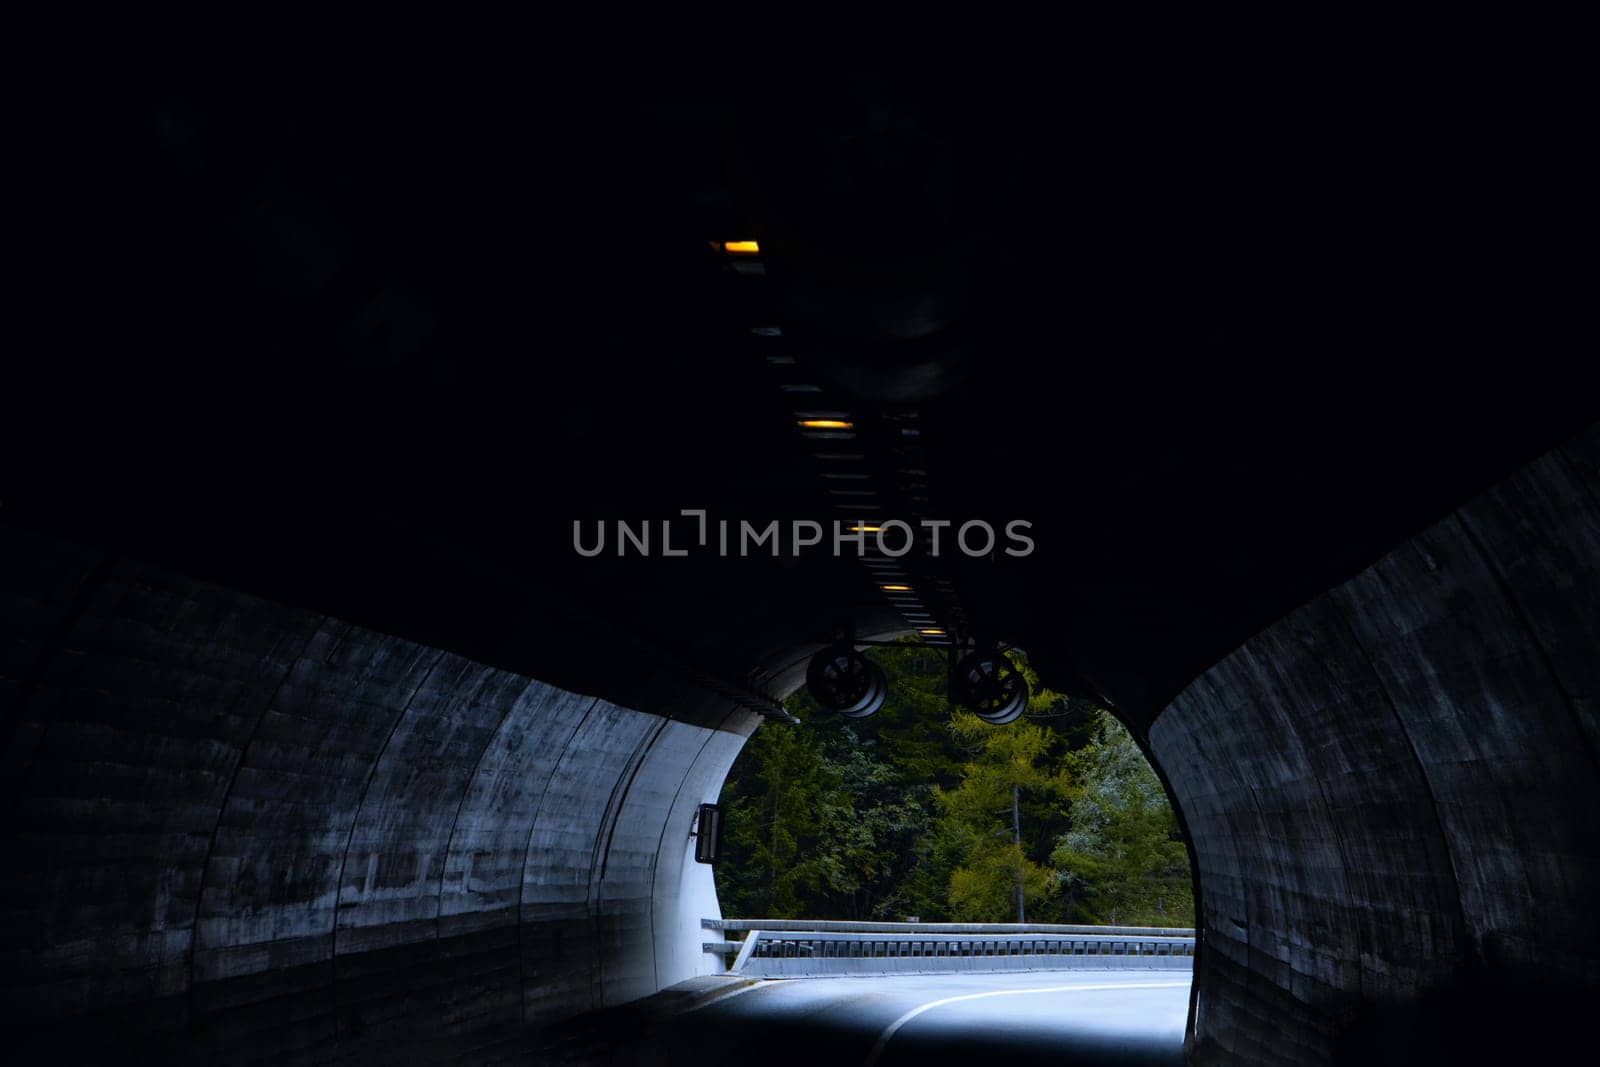 Emerging from Darkness: The Journey Through a Tunnel with Light at the End. by NadyaBeson